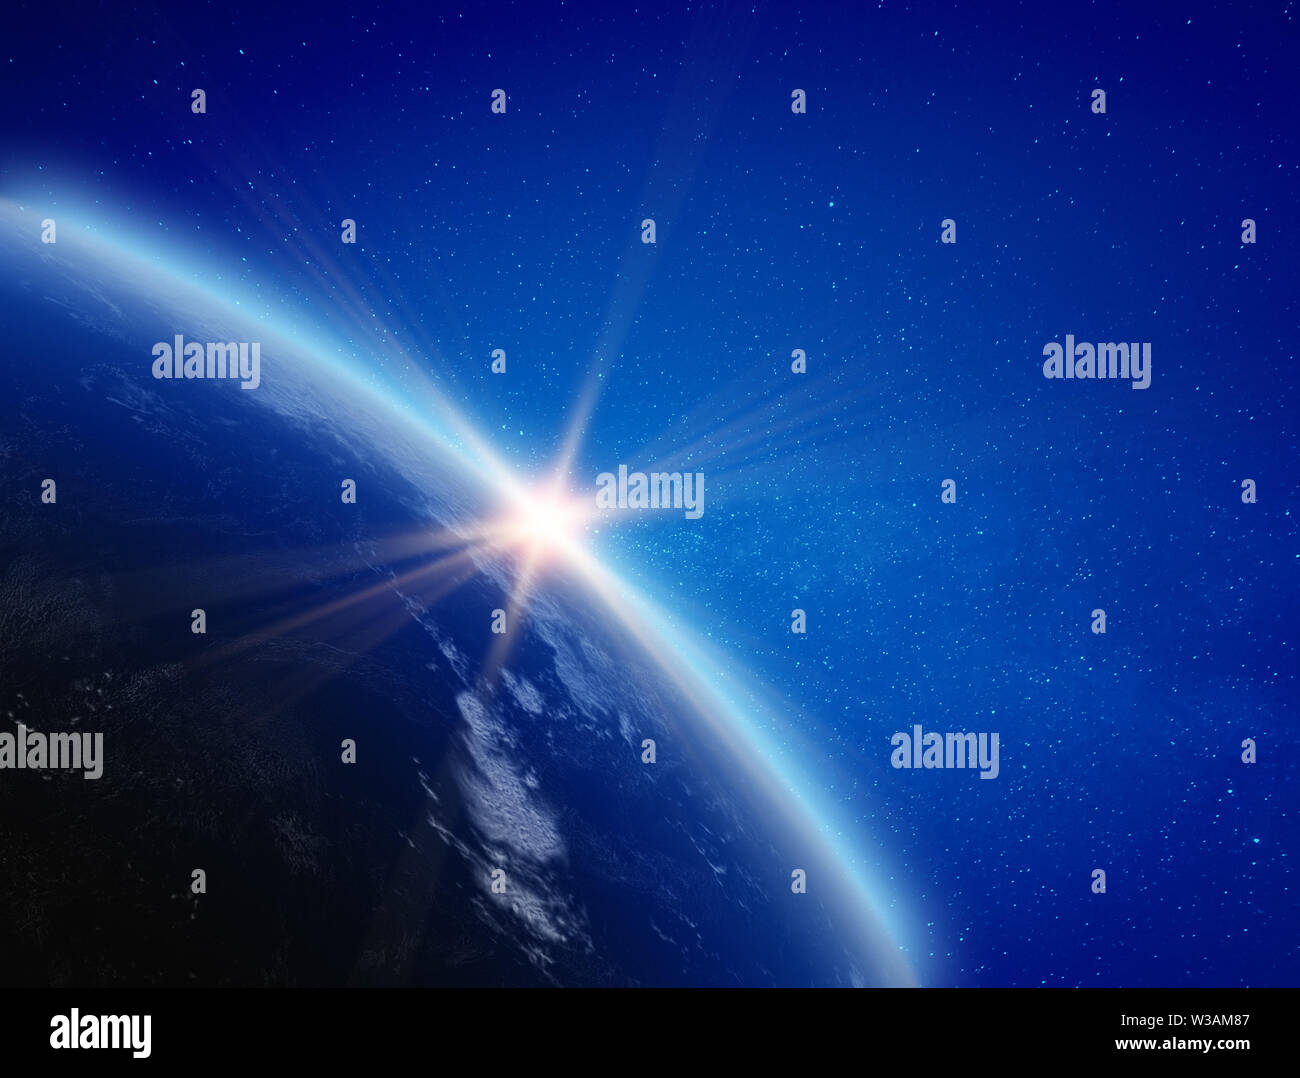 Planet Earth atmosphere Stock Photo